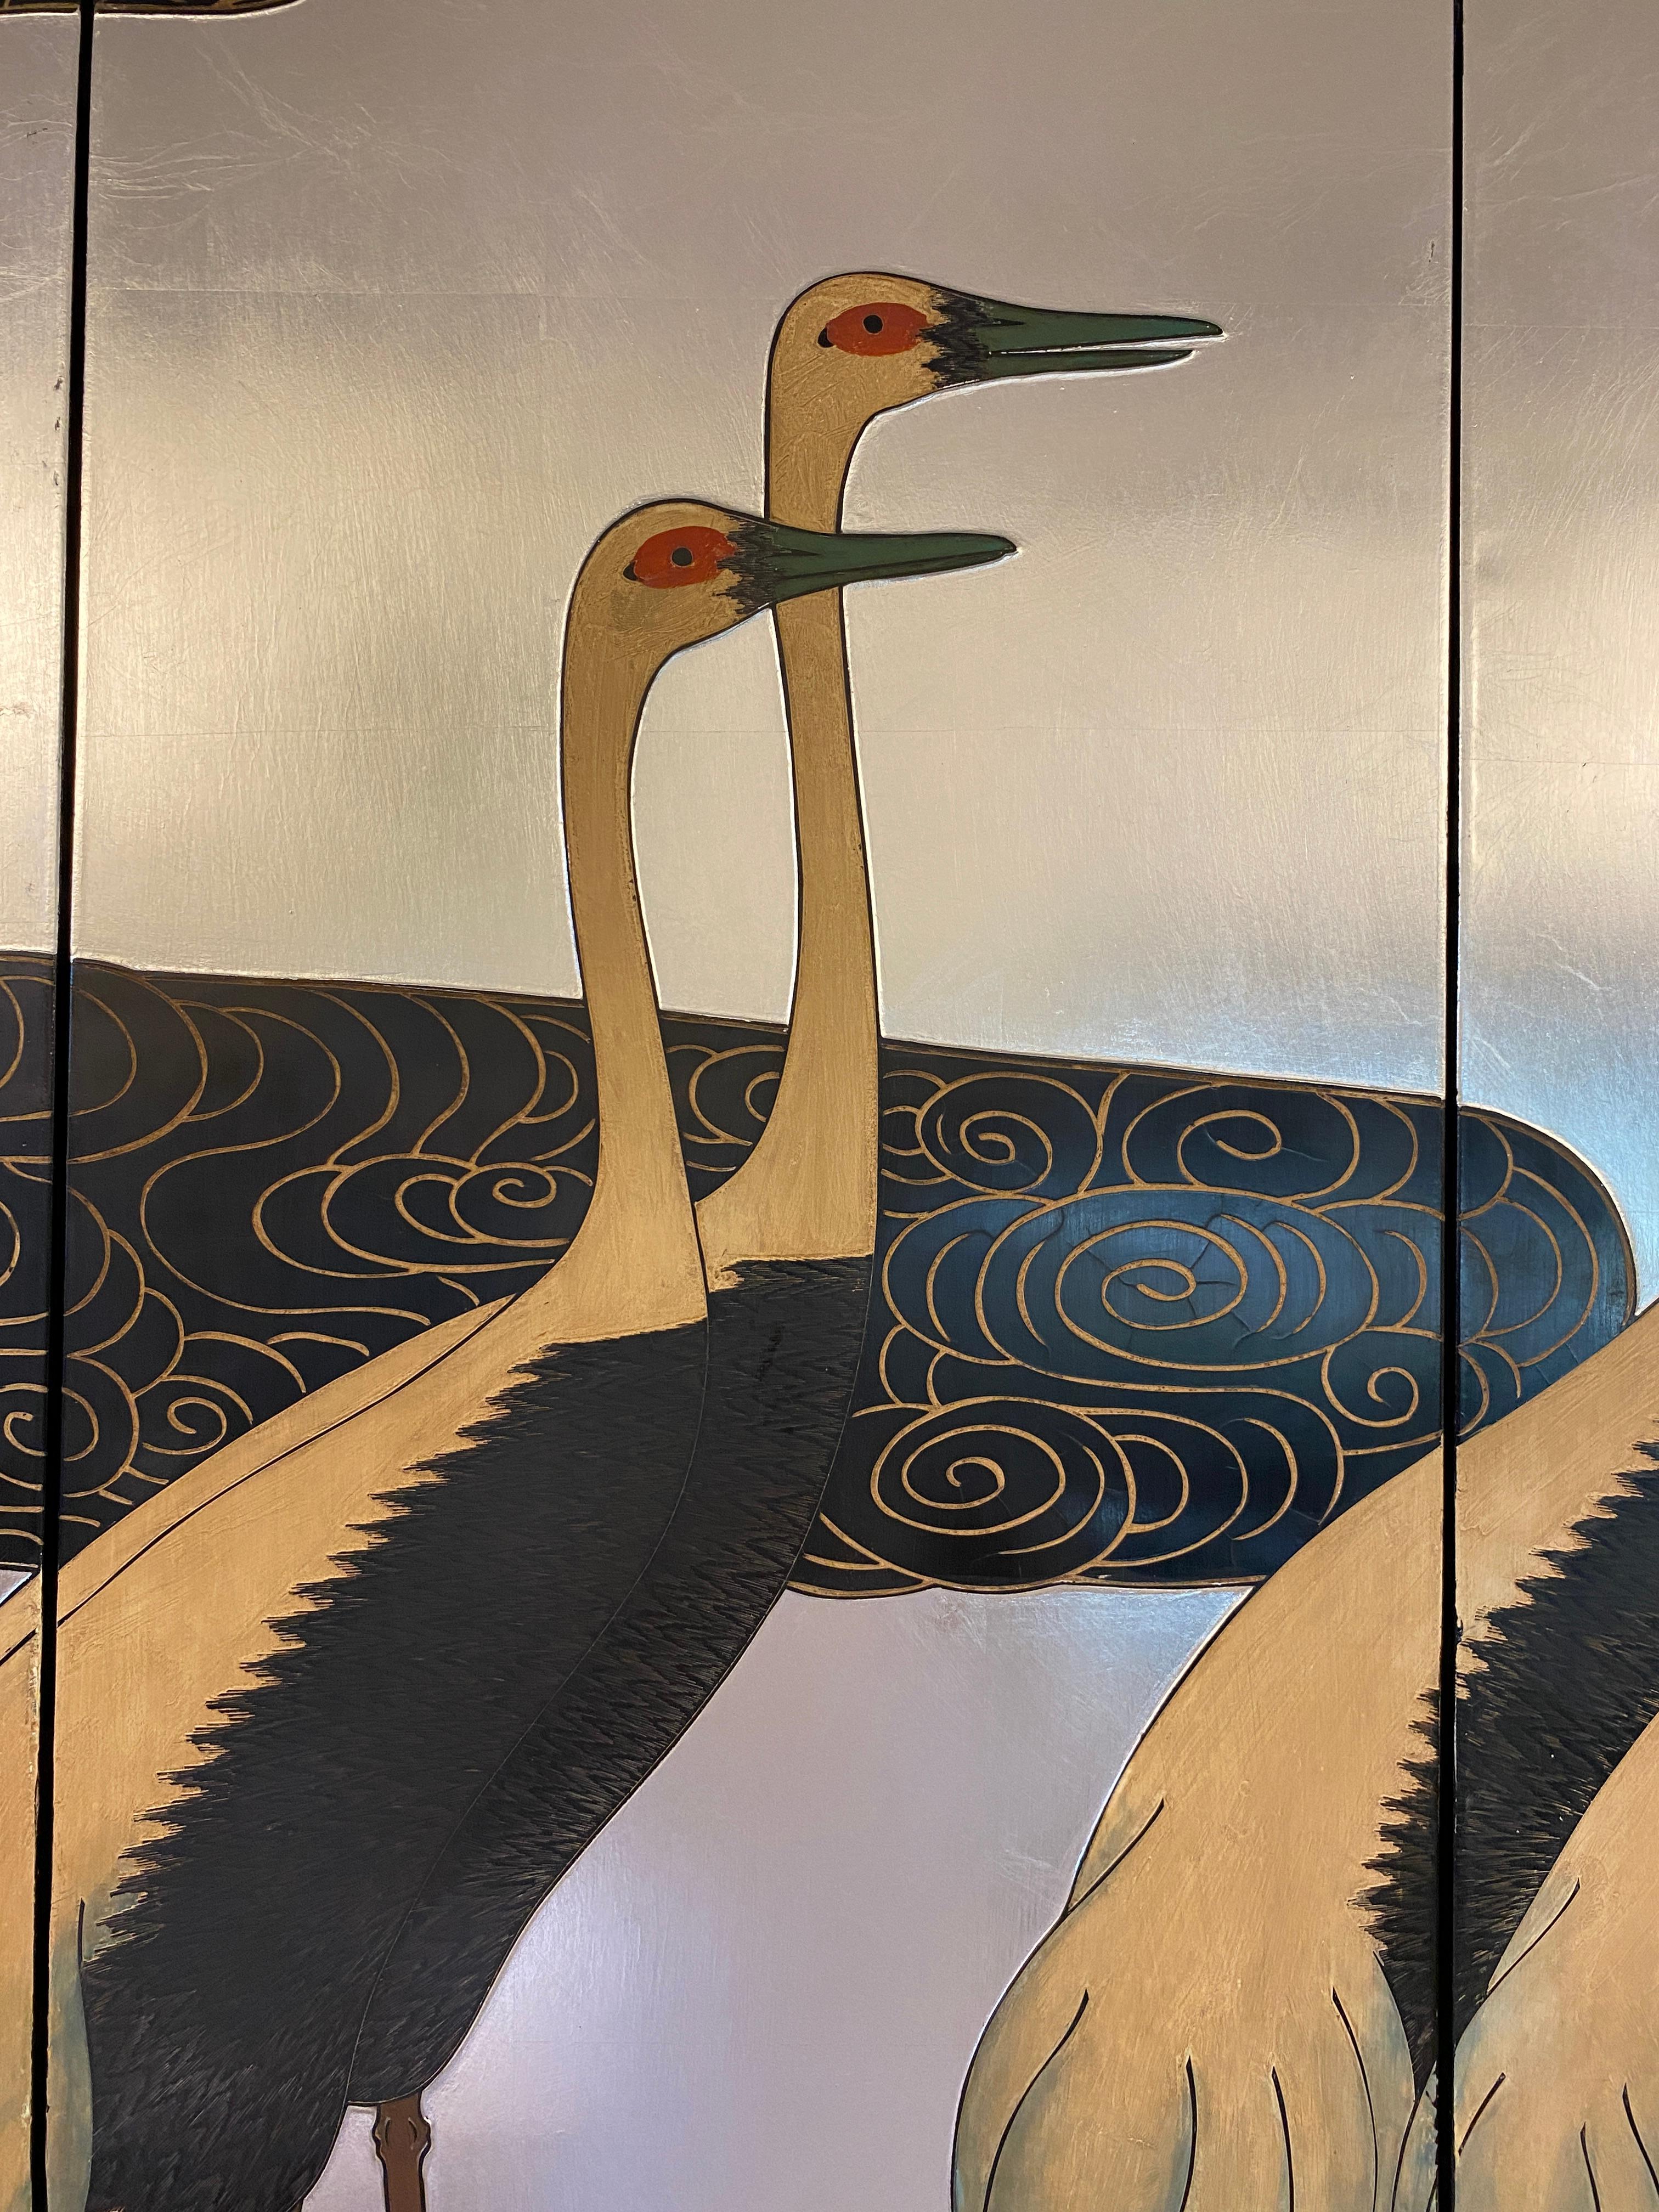 Stunning Japanese art panels displaying the beauty of 6 cranes.

This bold and innovative composition presents a grouping of white-naped cranes extending across a set of four Japanese panel screens. The 6 cranes in this work, grouped in rhythmic